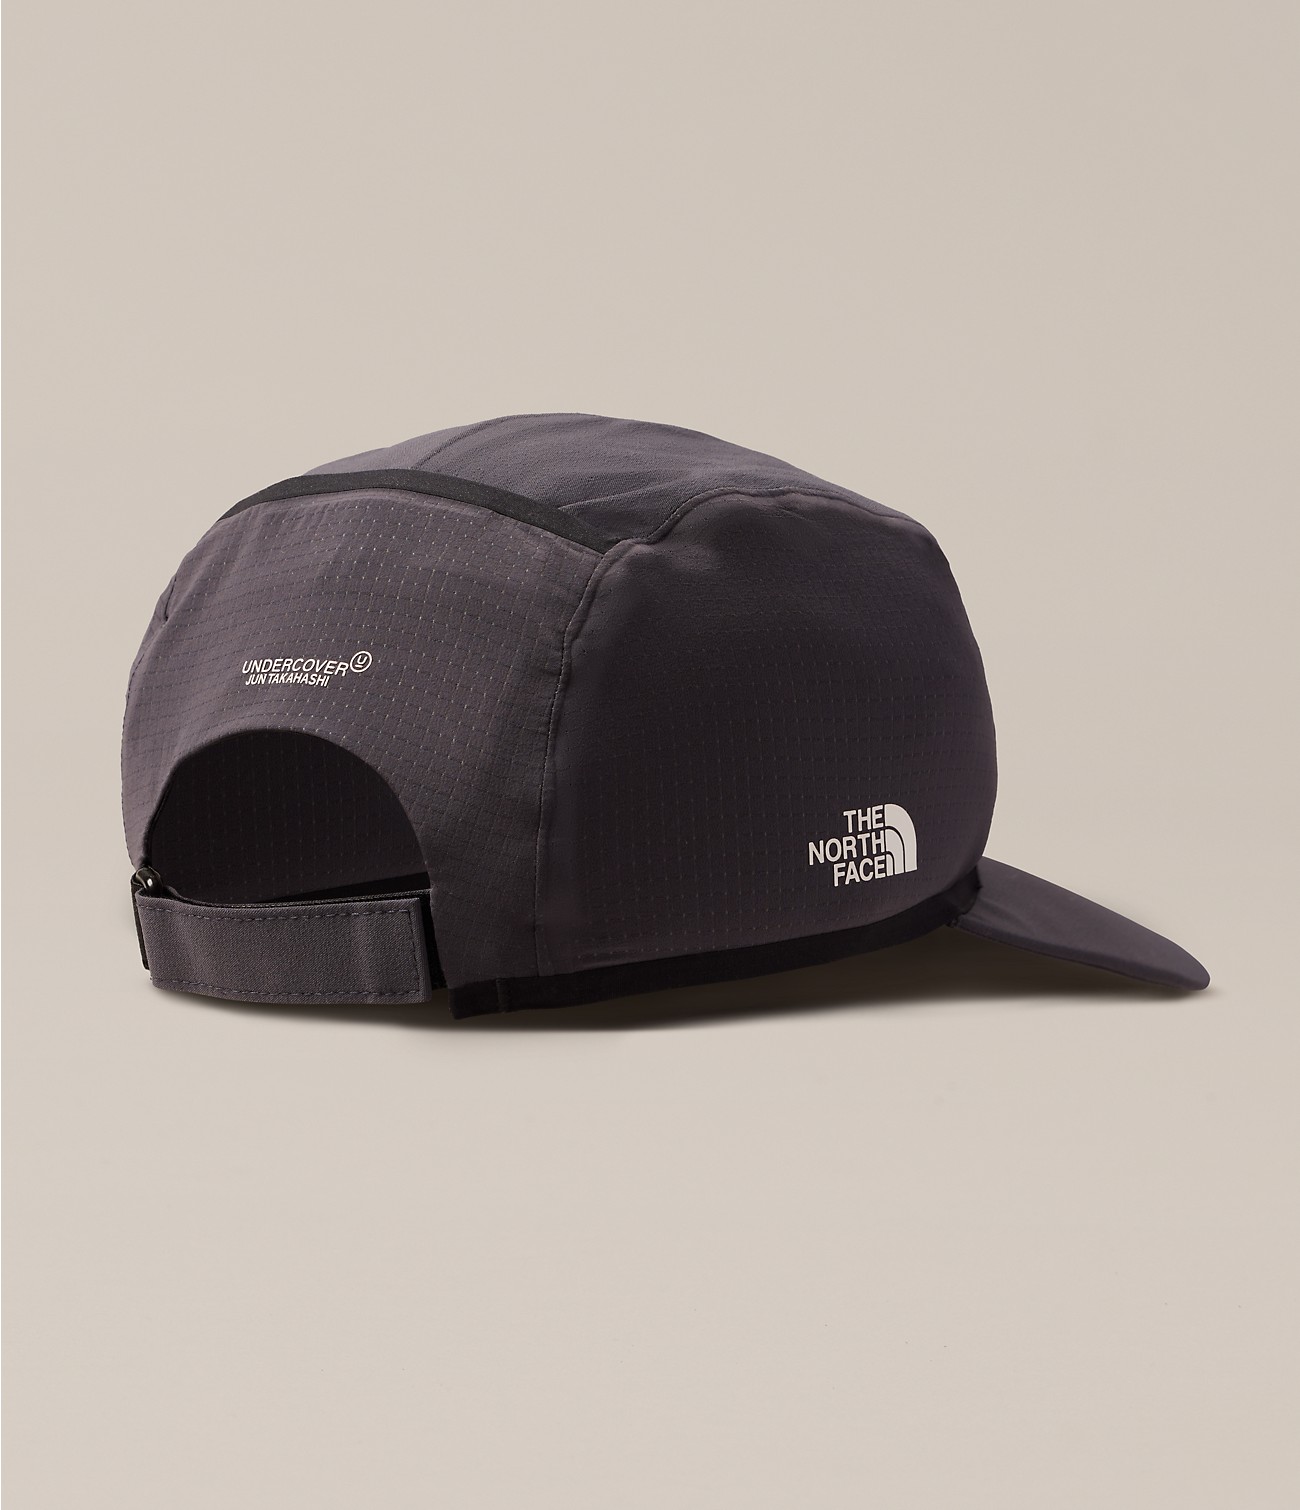 The North Face x UNDERCOVER SOUKUU Trail Run Cap | The North Face